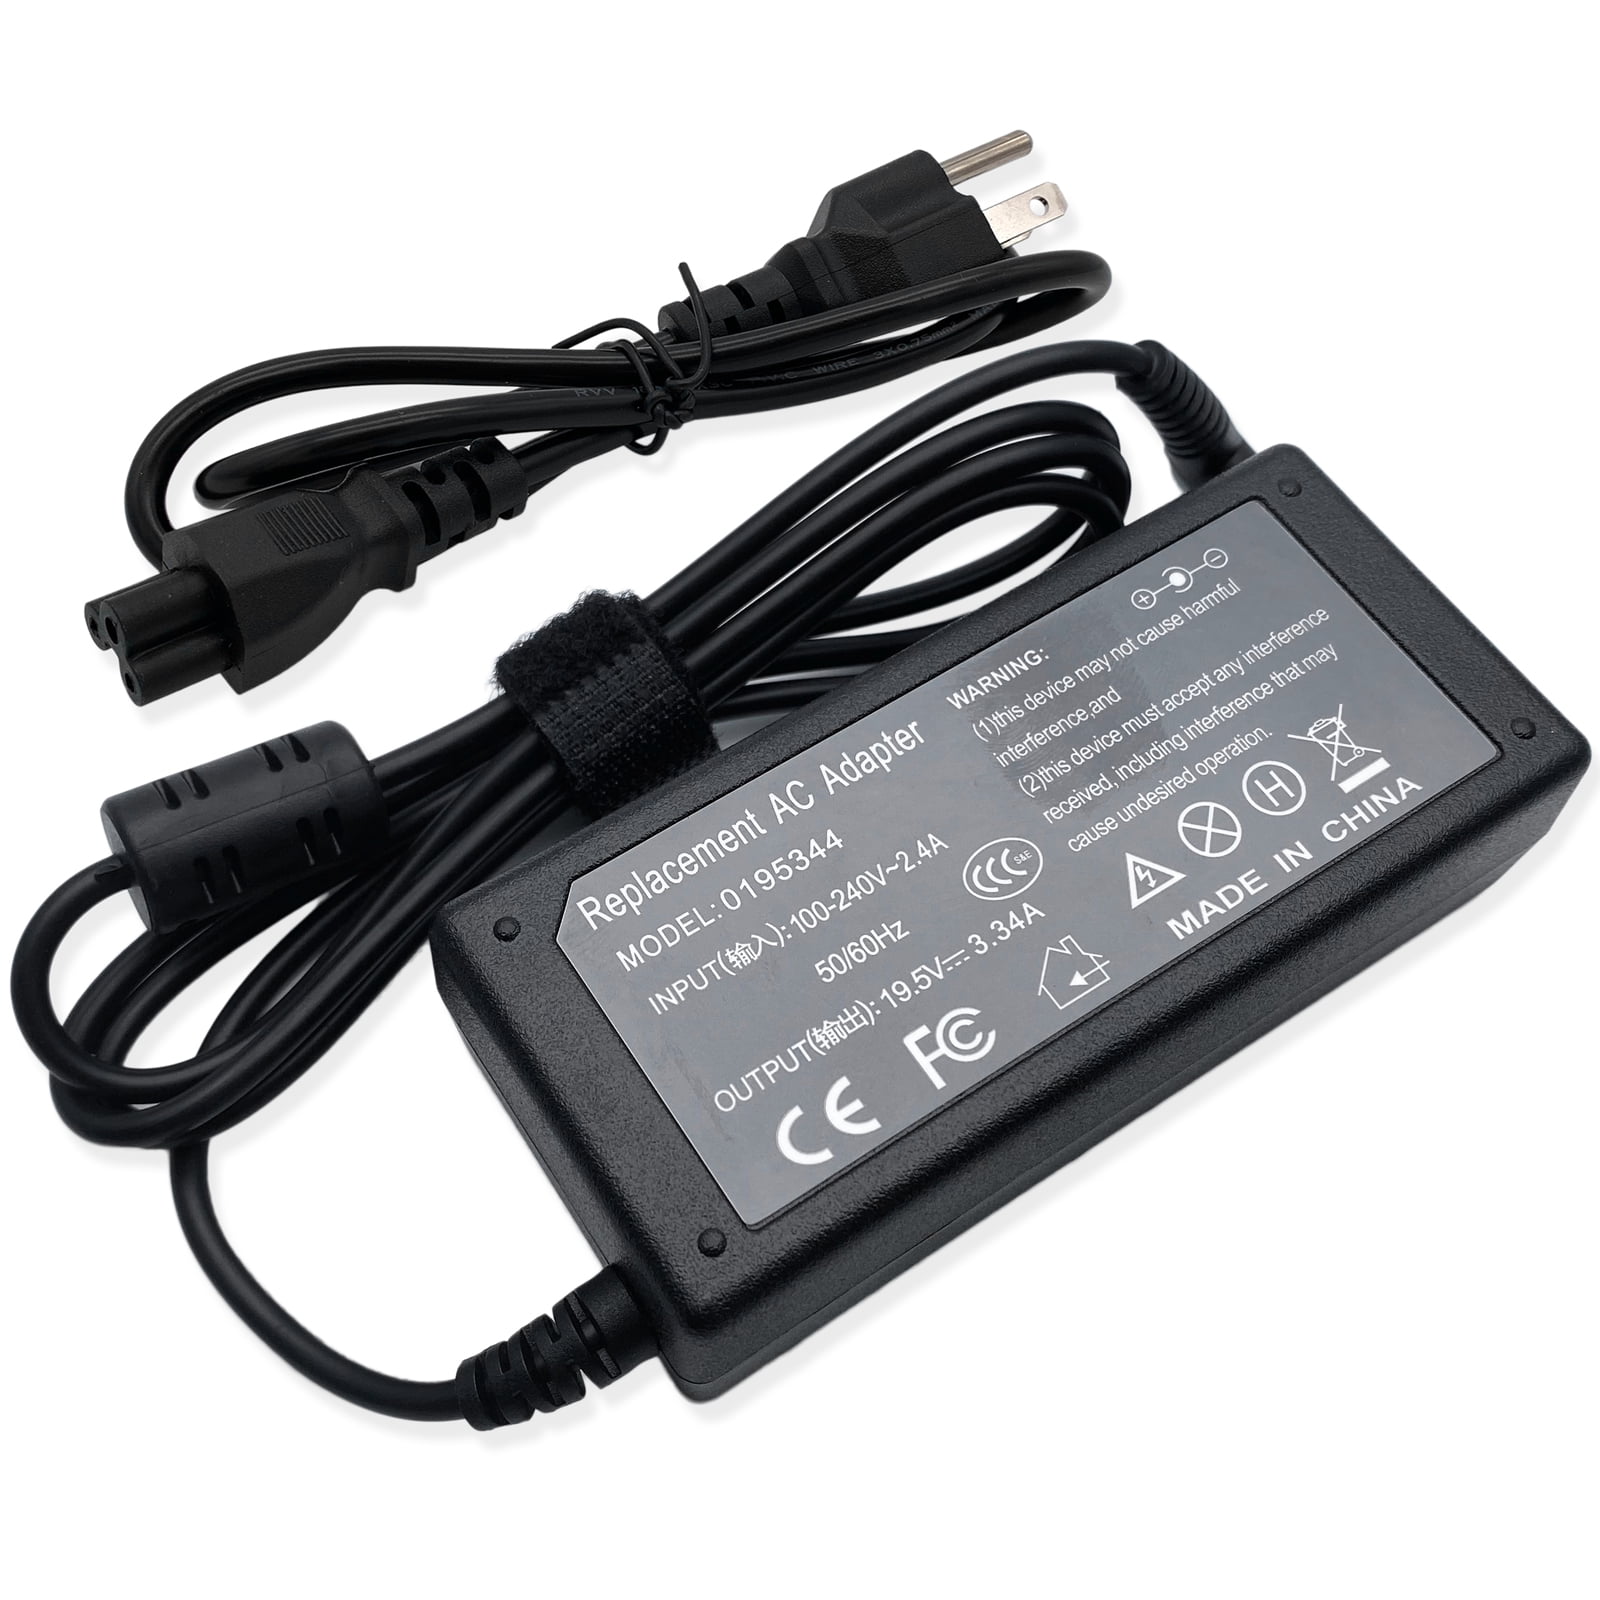 FYL Charger for Dell Inspiron Inspiron 15 3551 3558 3559 5552 5559 5565 5567 7548 PC 